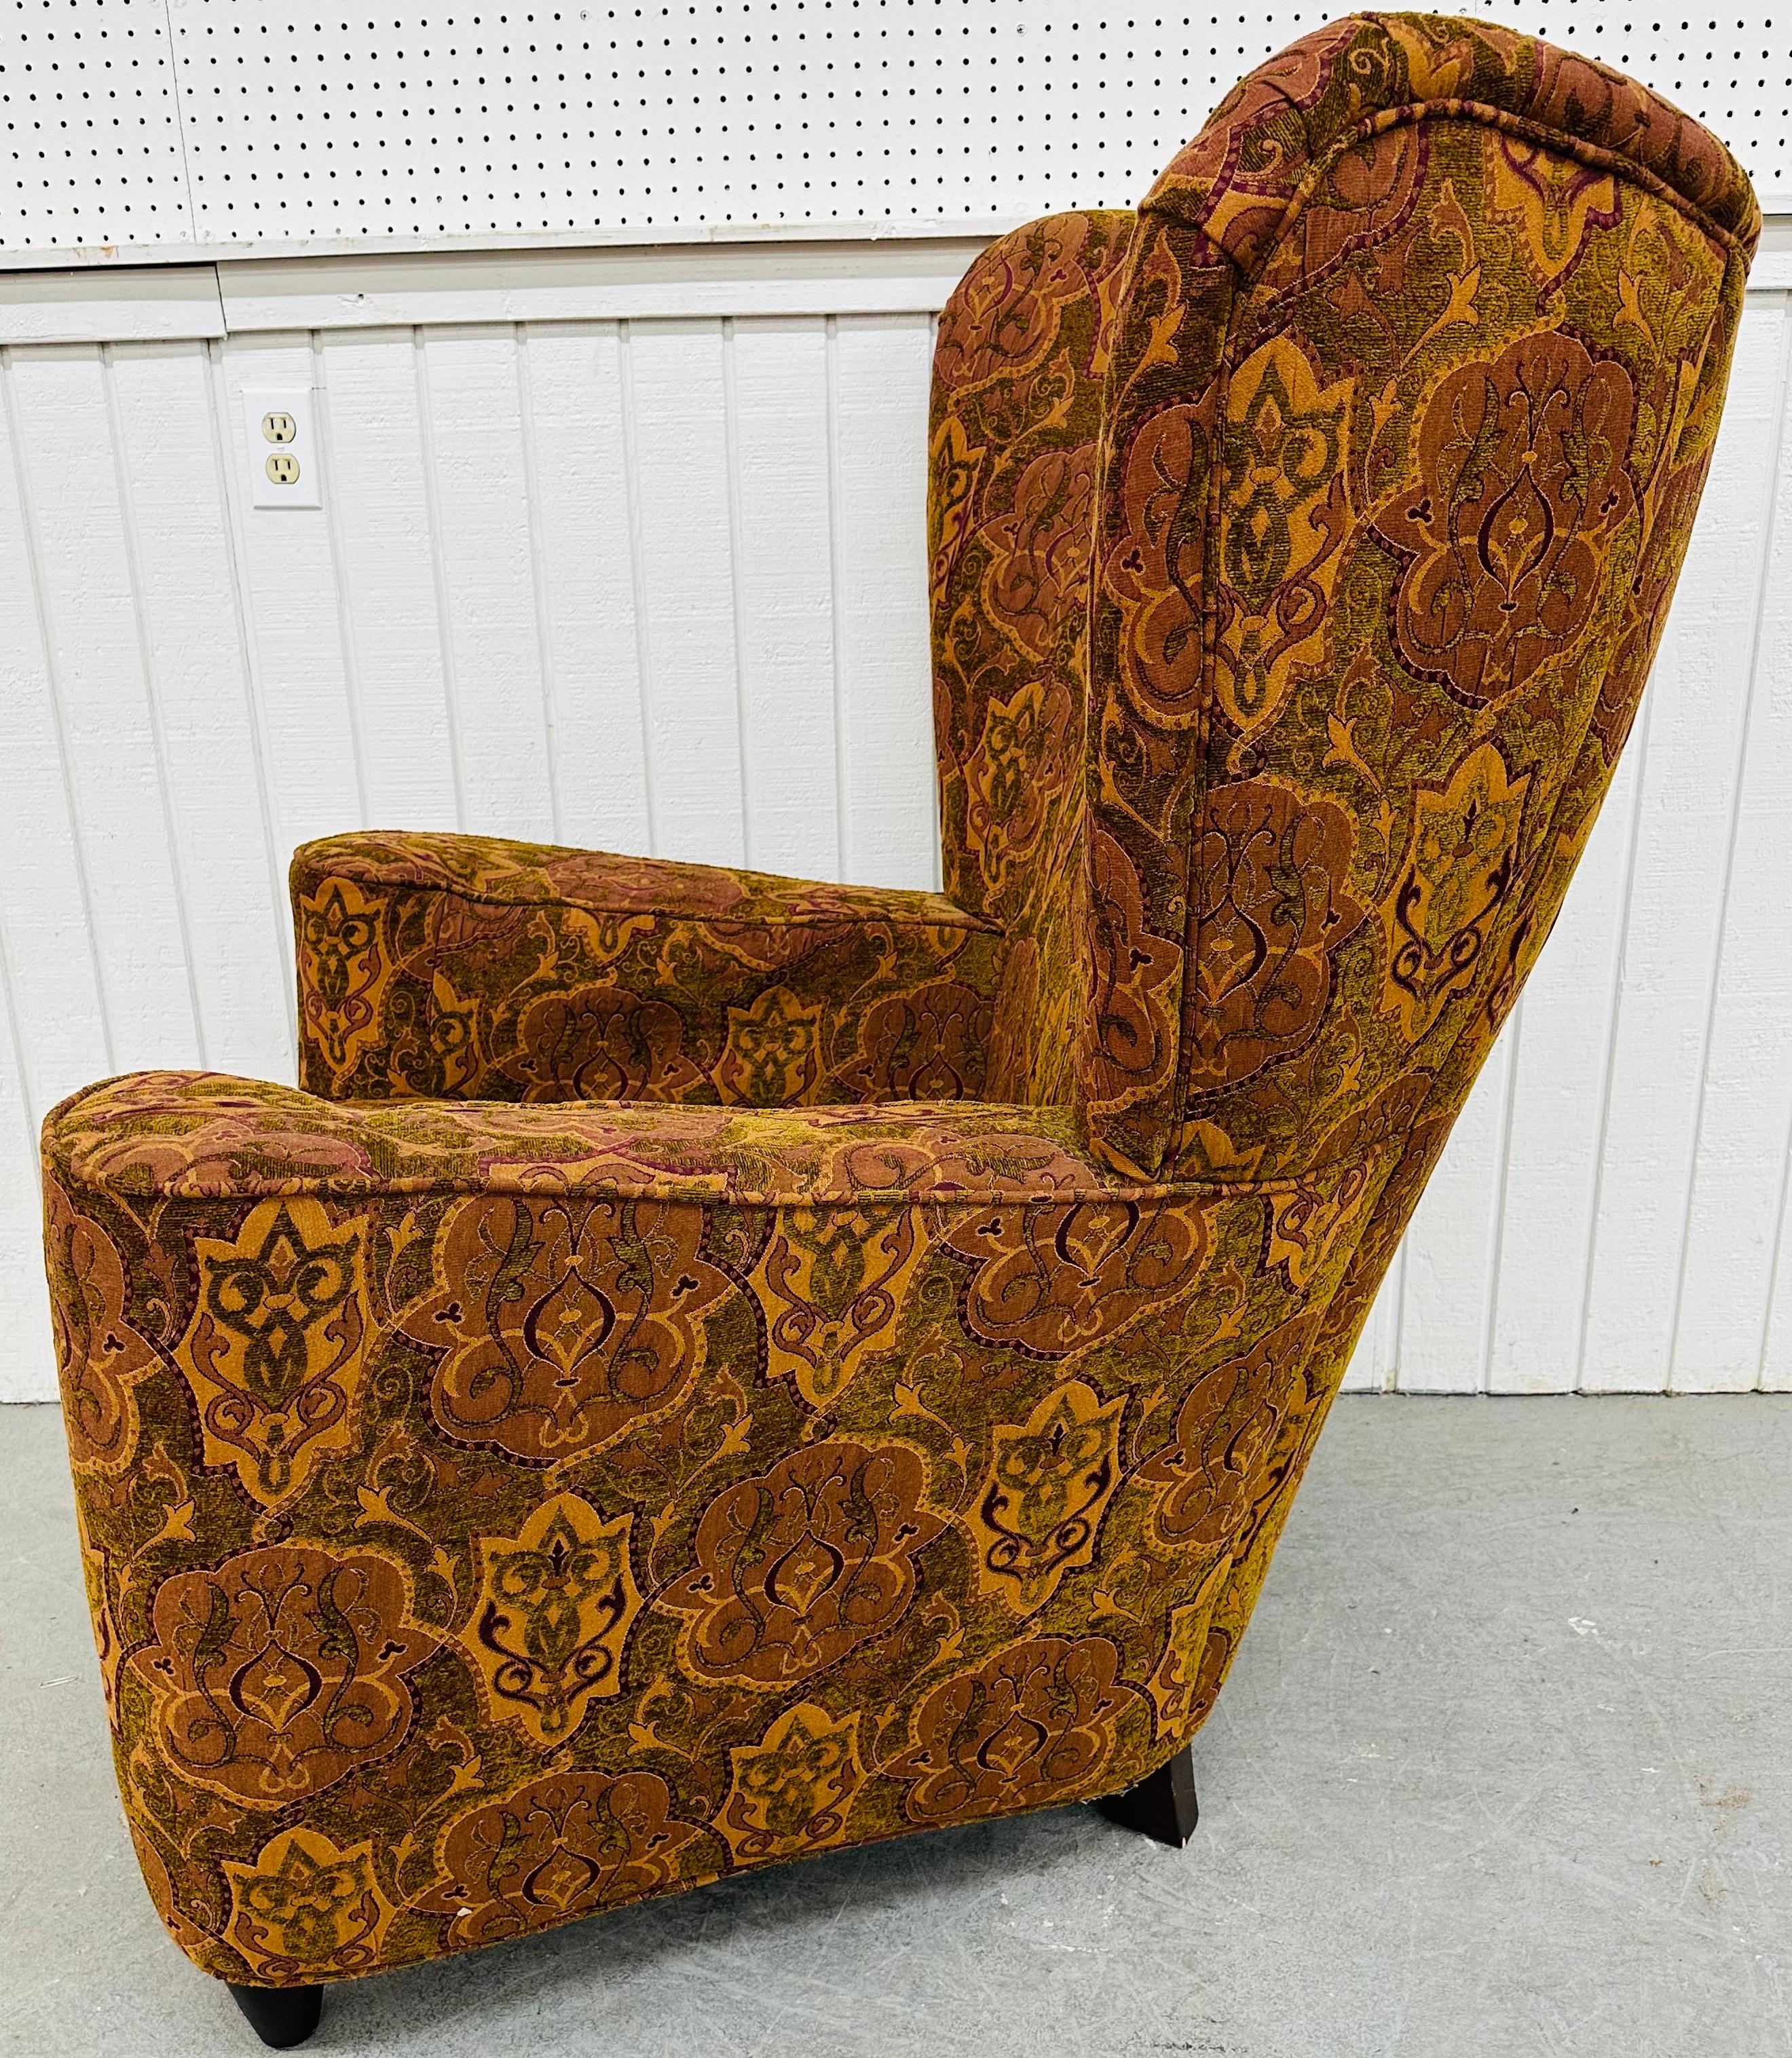 Vintage Thayer Coggin Oversized Upholstered Wing Chair In Good Condition For Sale In Clarksboro, NJ